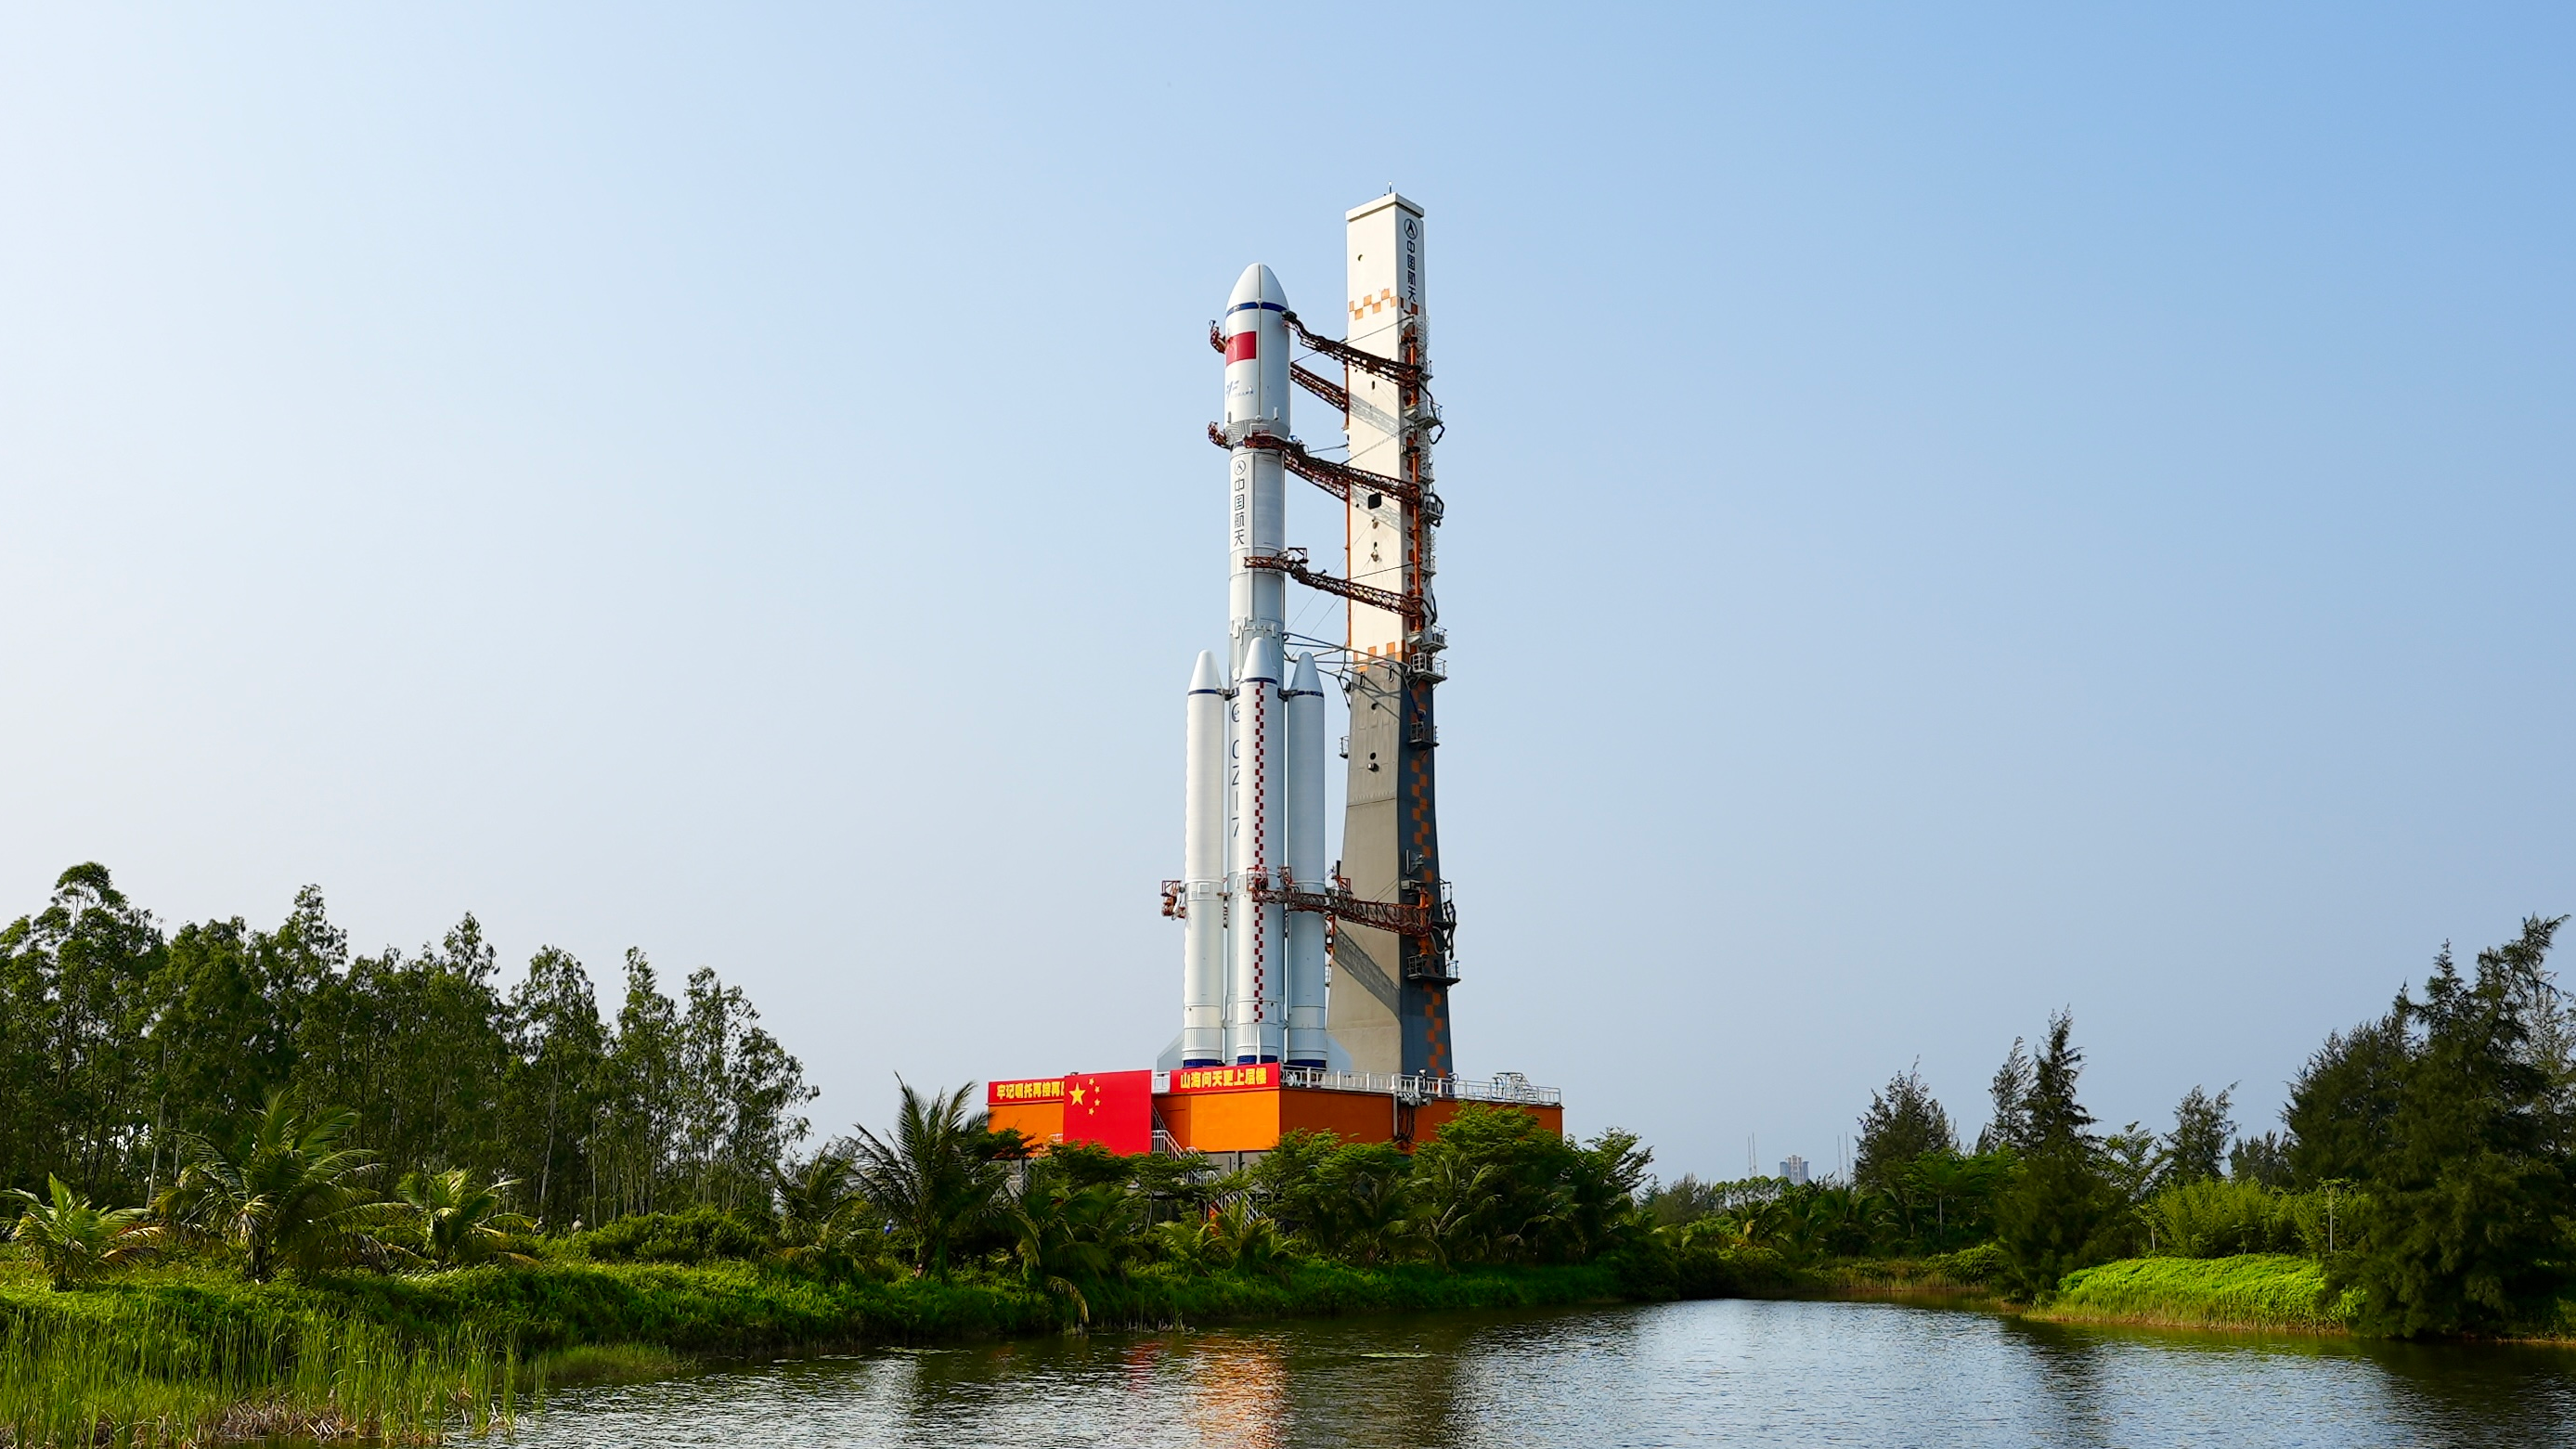  Tianzhou-6 cargo spacecraft was vertically transported to the launchpad at Wenchang Spacecraft Launch Site in south China's Hainan Province, May 7, 2023. /CGTN